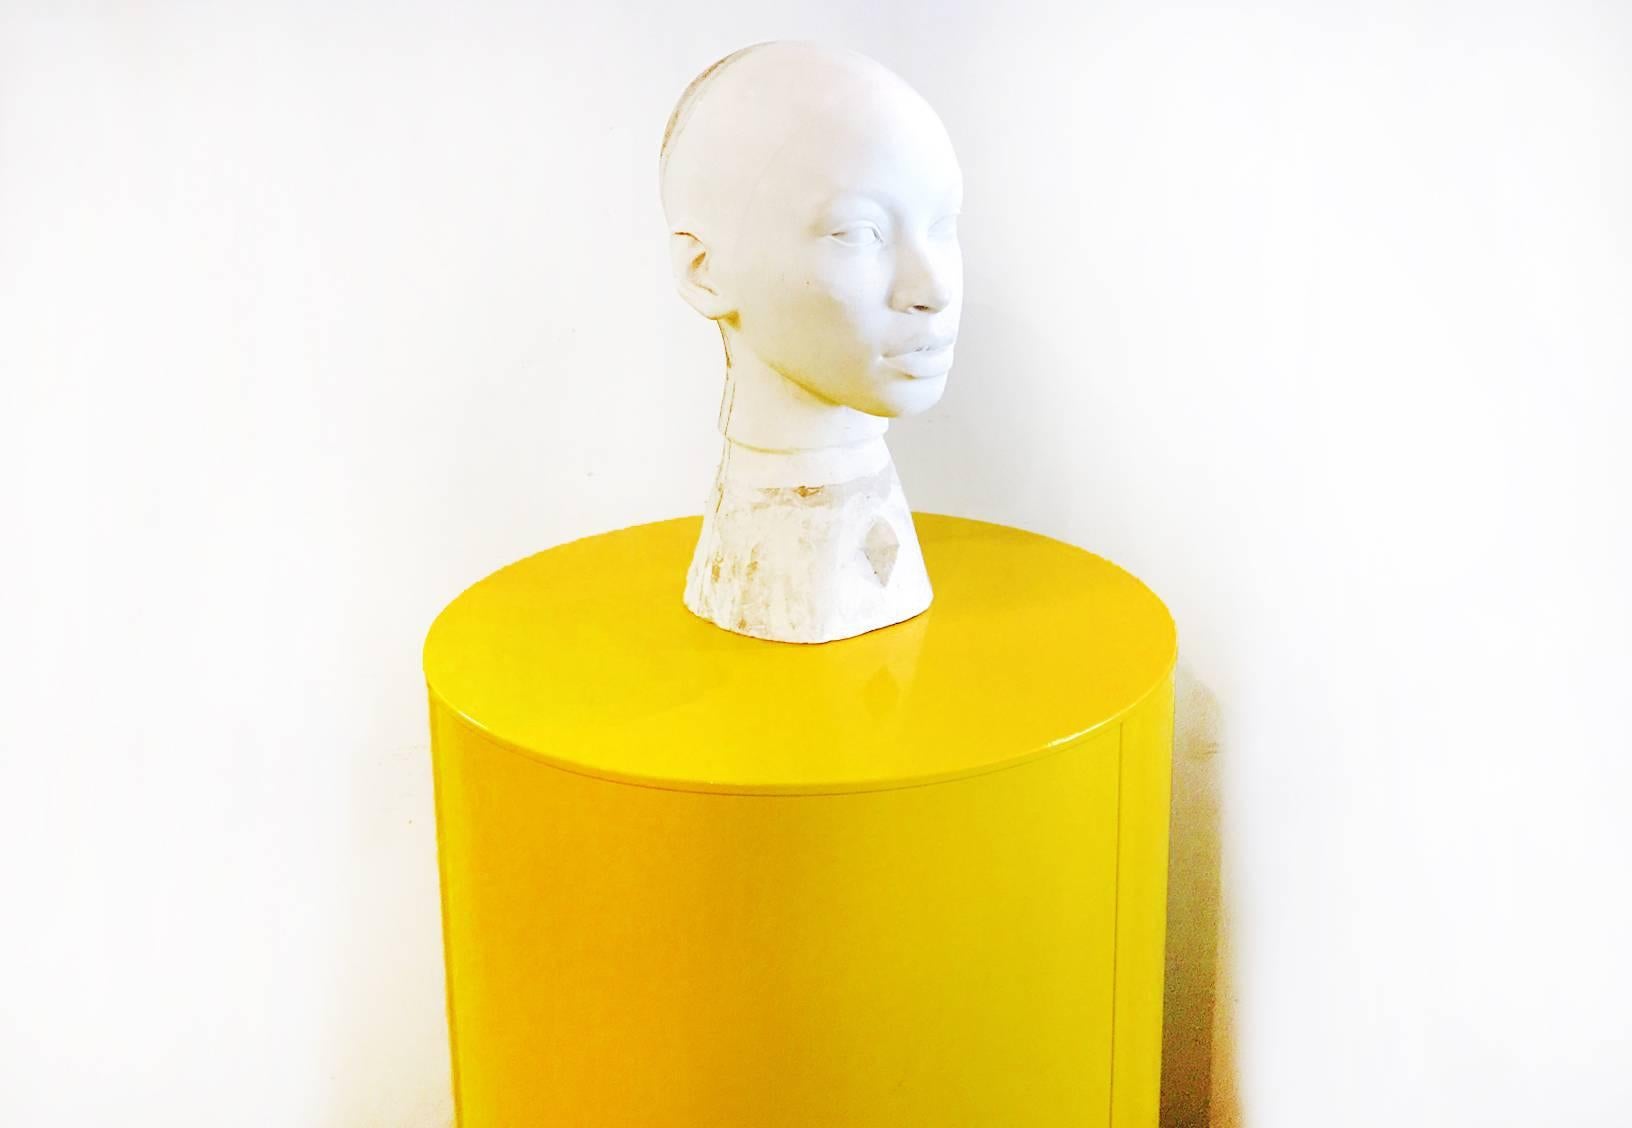 Great vintage steel pedestal refinished in powder-coat yellow. Great for sculpture base, plants, retail display or tall side table.

Dimensions: 17.25" diameter x 36" height.